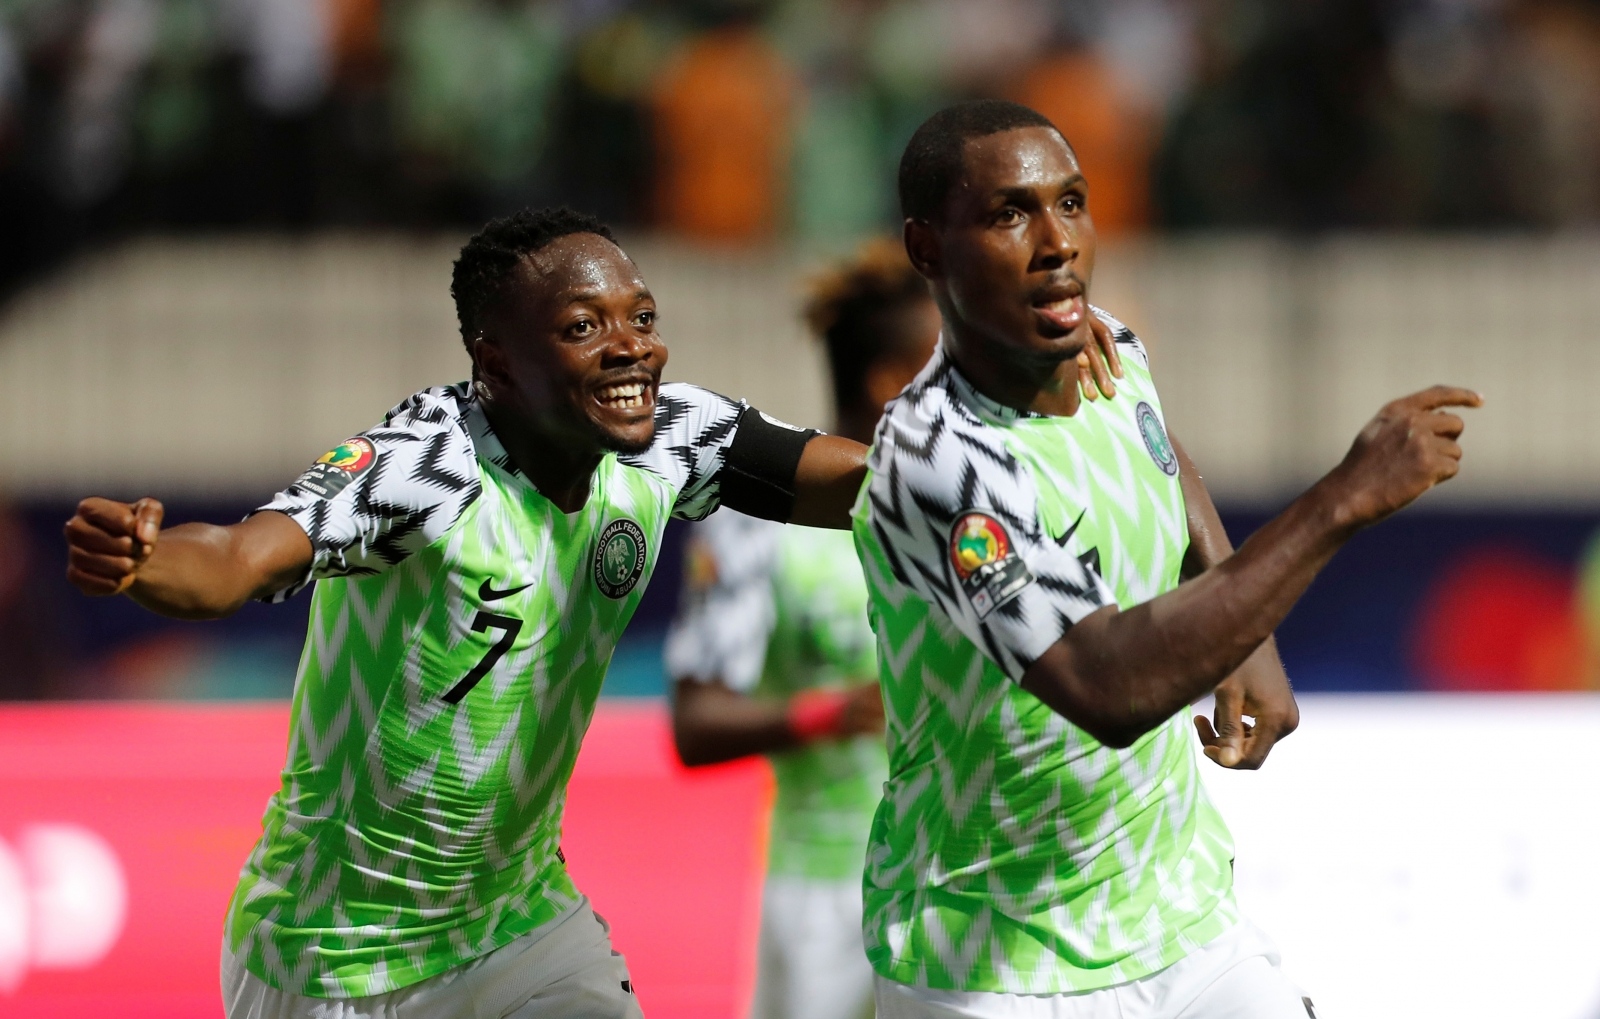 Africa Cup of Nations 2019 - Round of 16 - Nigeria v Cameroon Soccer Football - Africa Cup of Nations 2019 - Round of 16 - Nigeria v Cameroon - Alexandria Stadium, Alexandria, Egypt - July 6, 2019  Nigeria's Odion Ighalo celebrates scoring their second goal with Ahmed Musa     REUTERS/Mohamed Abd El Ghany Mohamed Abd El Ghany